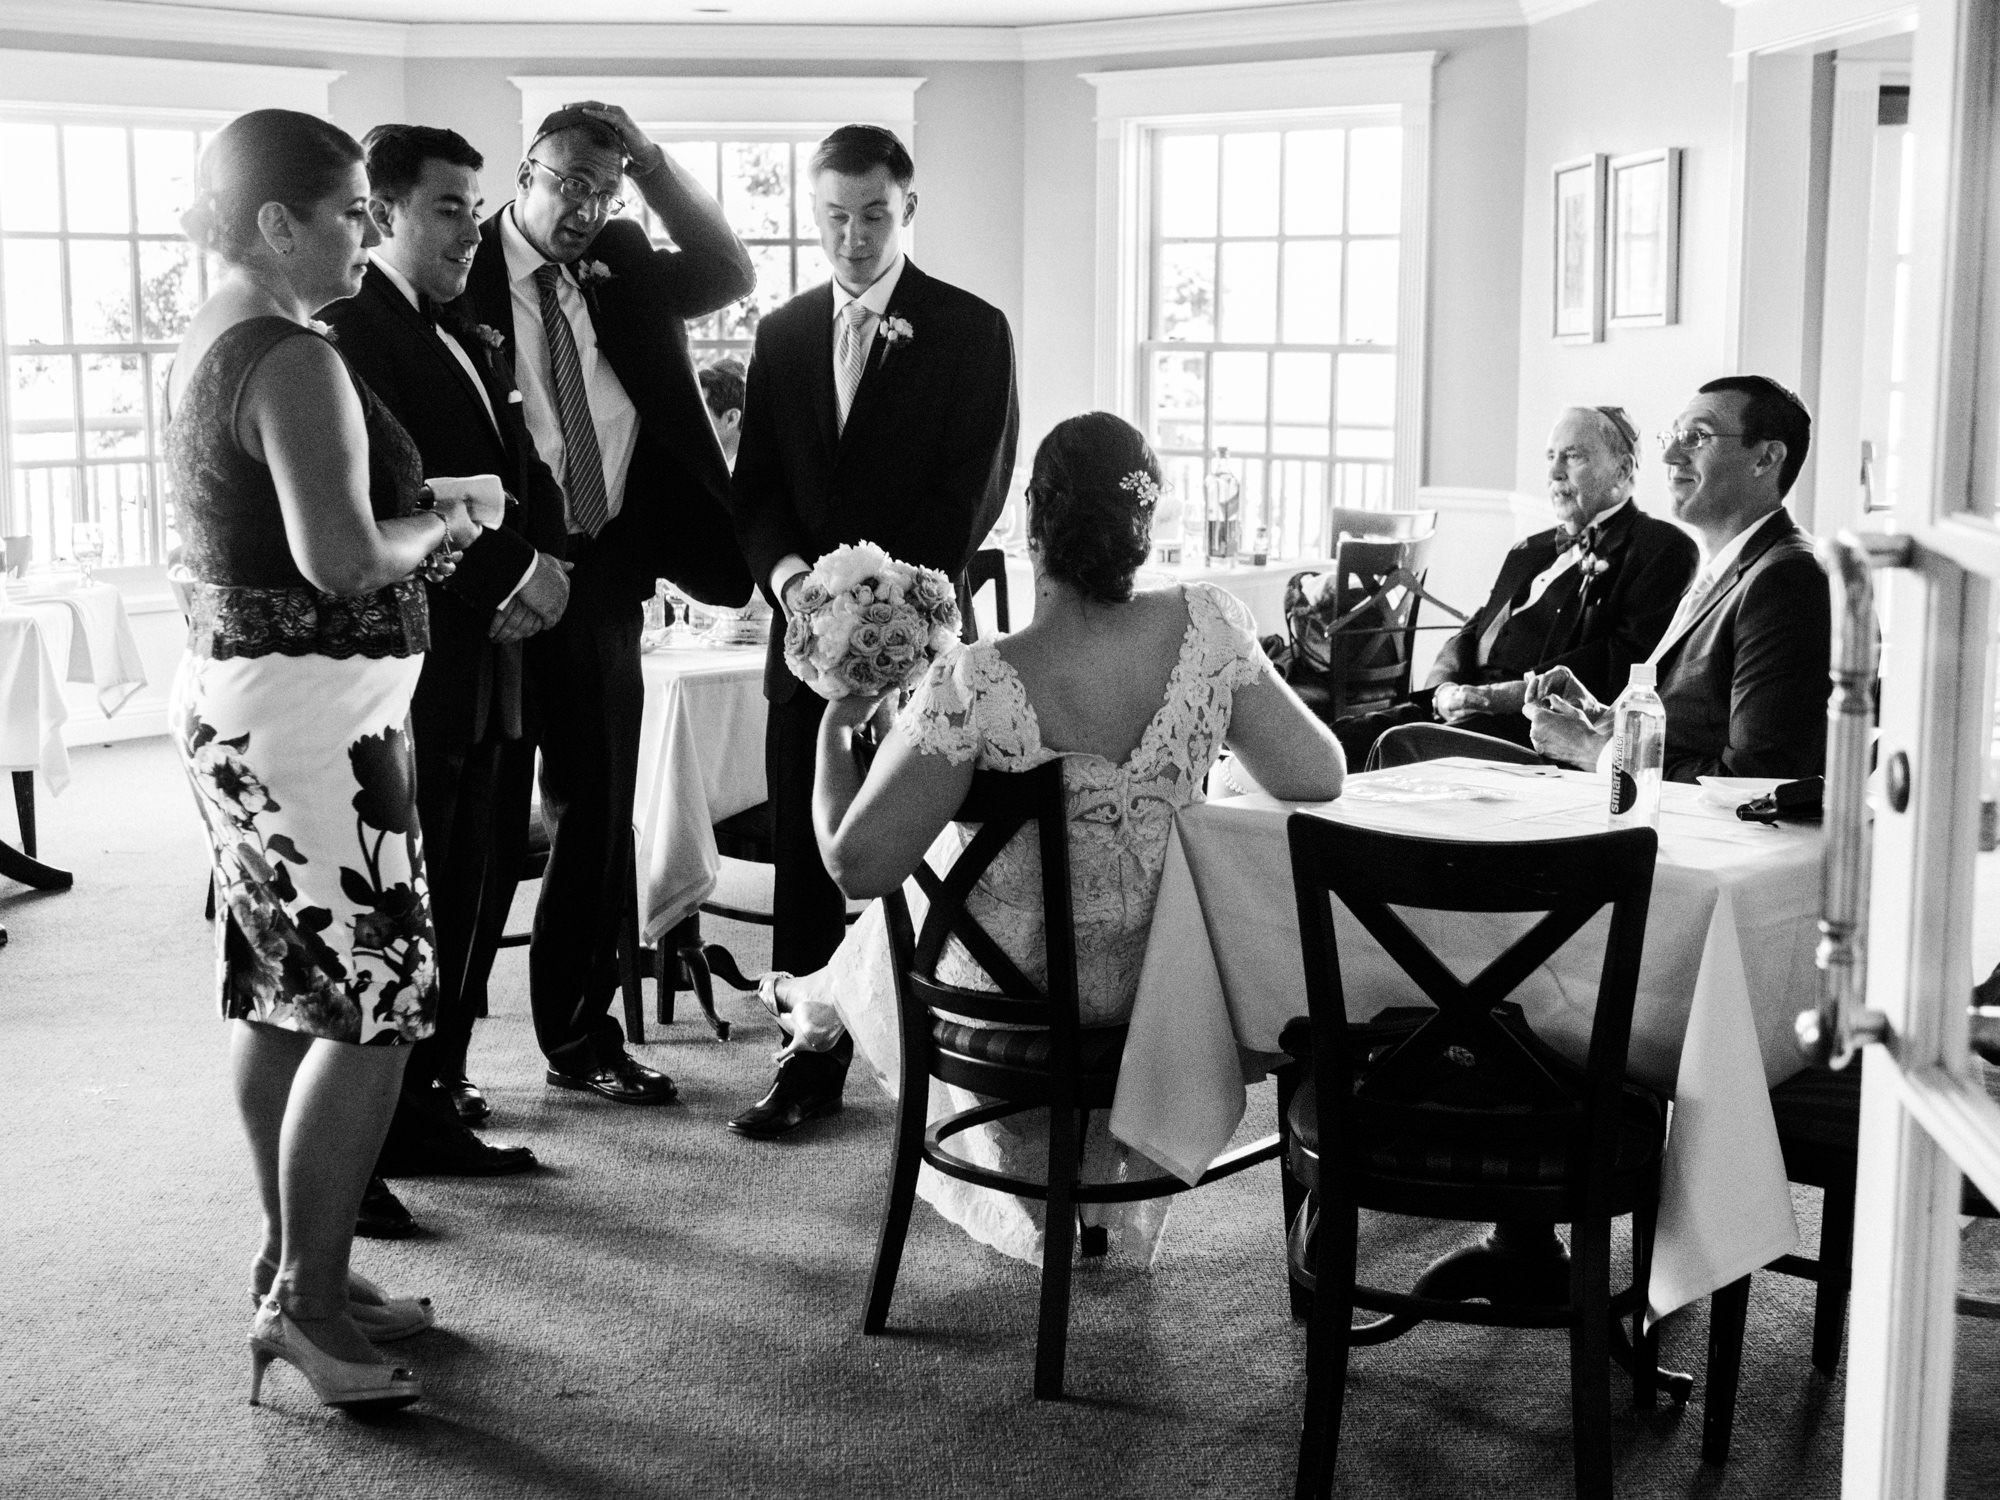 Joelle, Ryan and their wedding party take a break before the wedding ceremony at the Seattle Tennis Club, a wedding venue in Seattle, WA. Summer 2016. Photo by Seattle Wedding Photographers Jennifer Tai Photo Artistry.